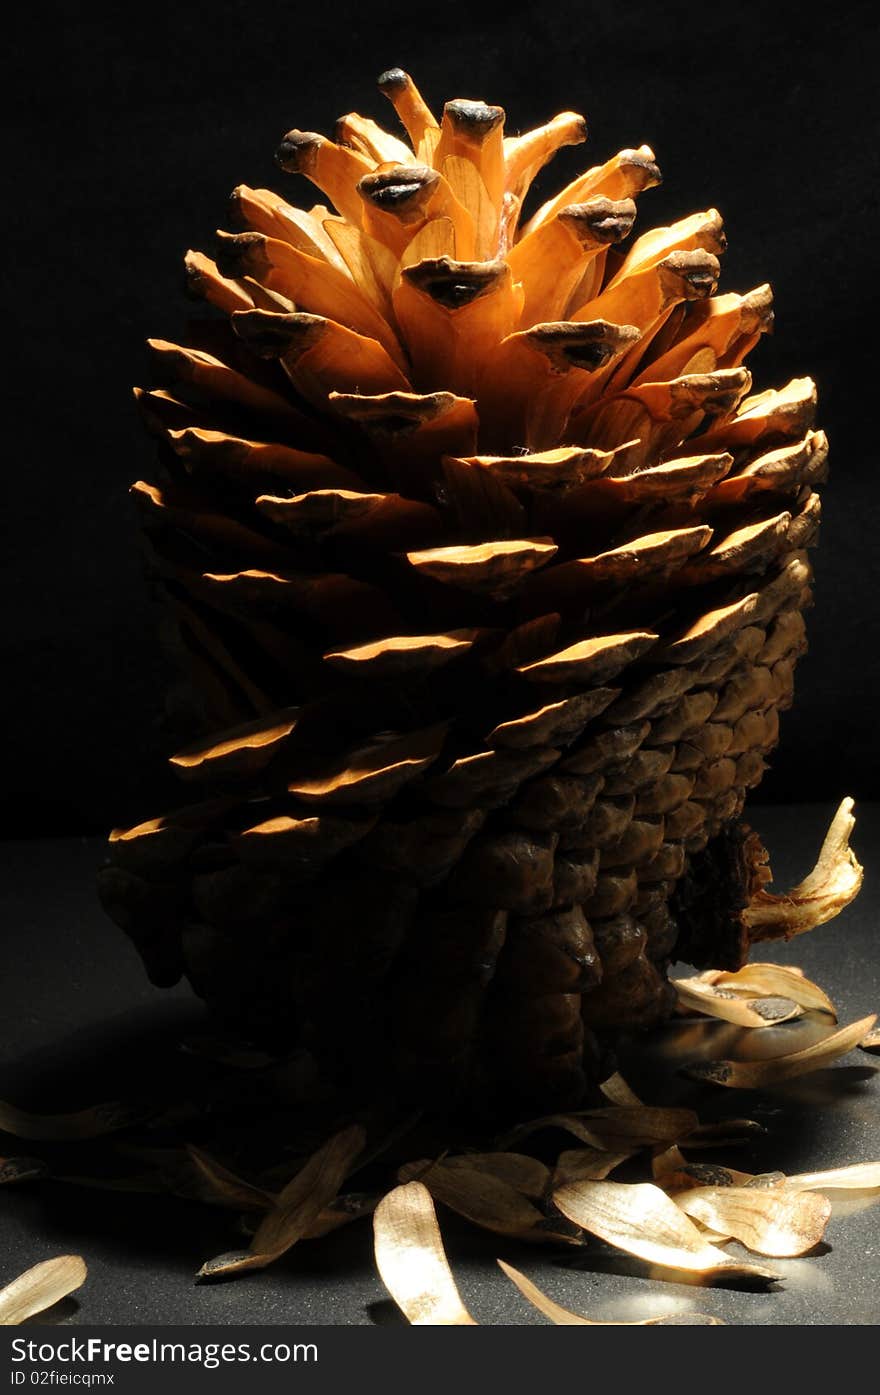 Half opened pine cone with directional light against dark background. Scattered seeds at base of cone